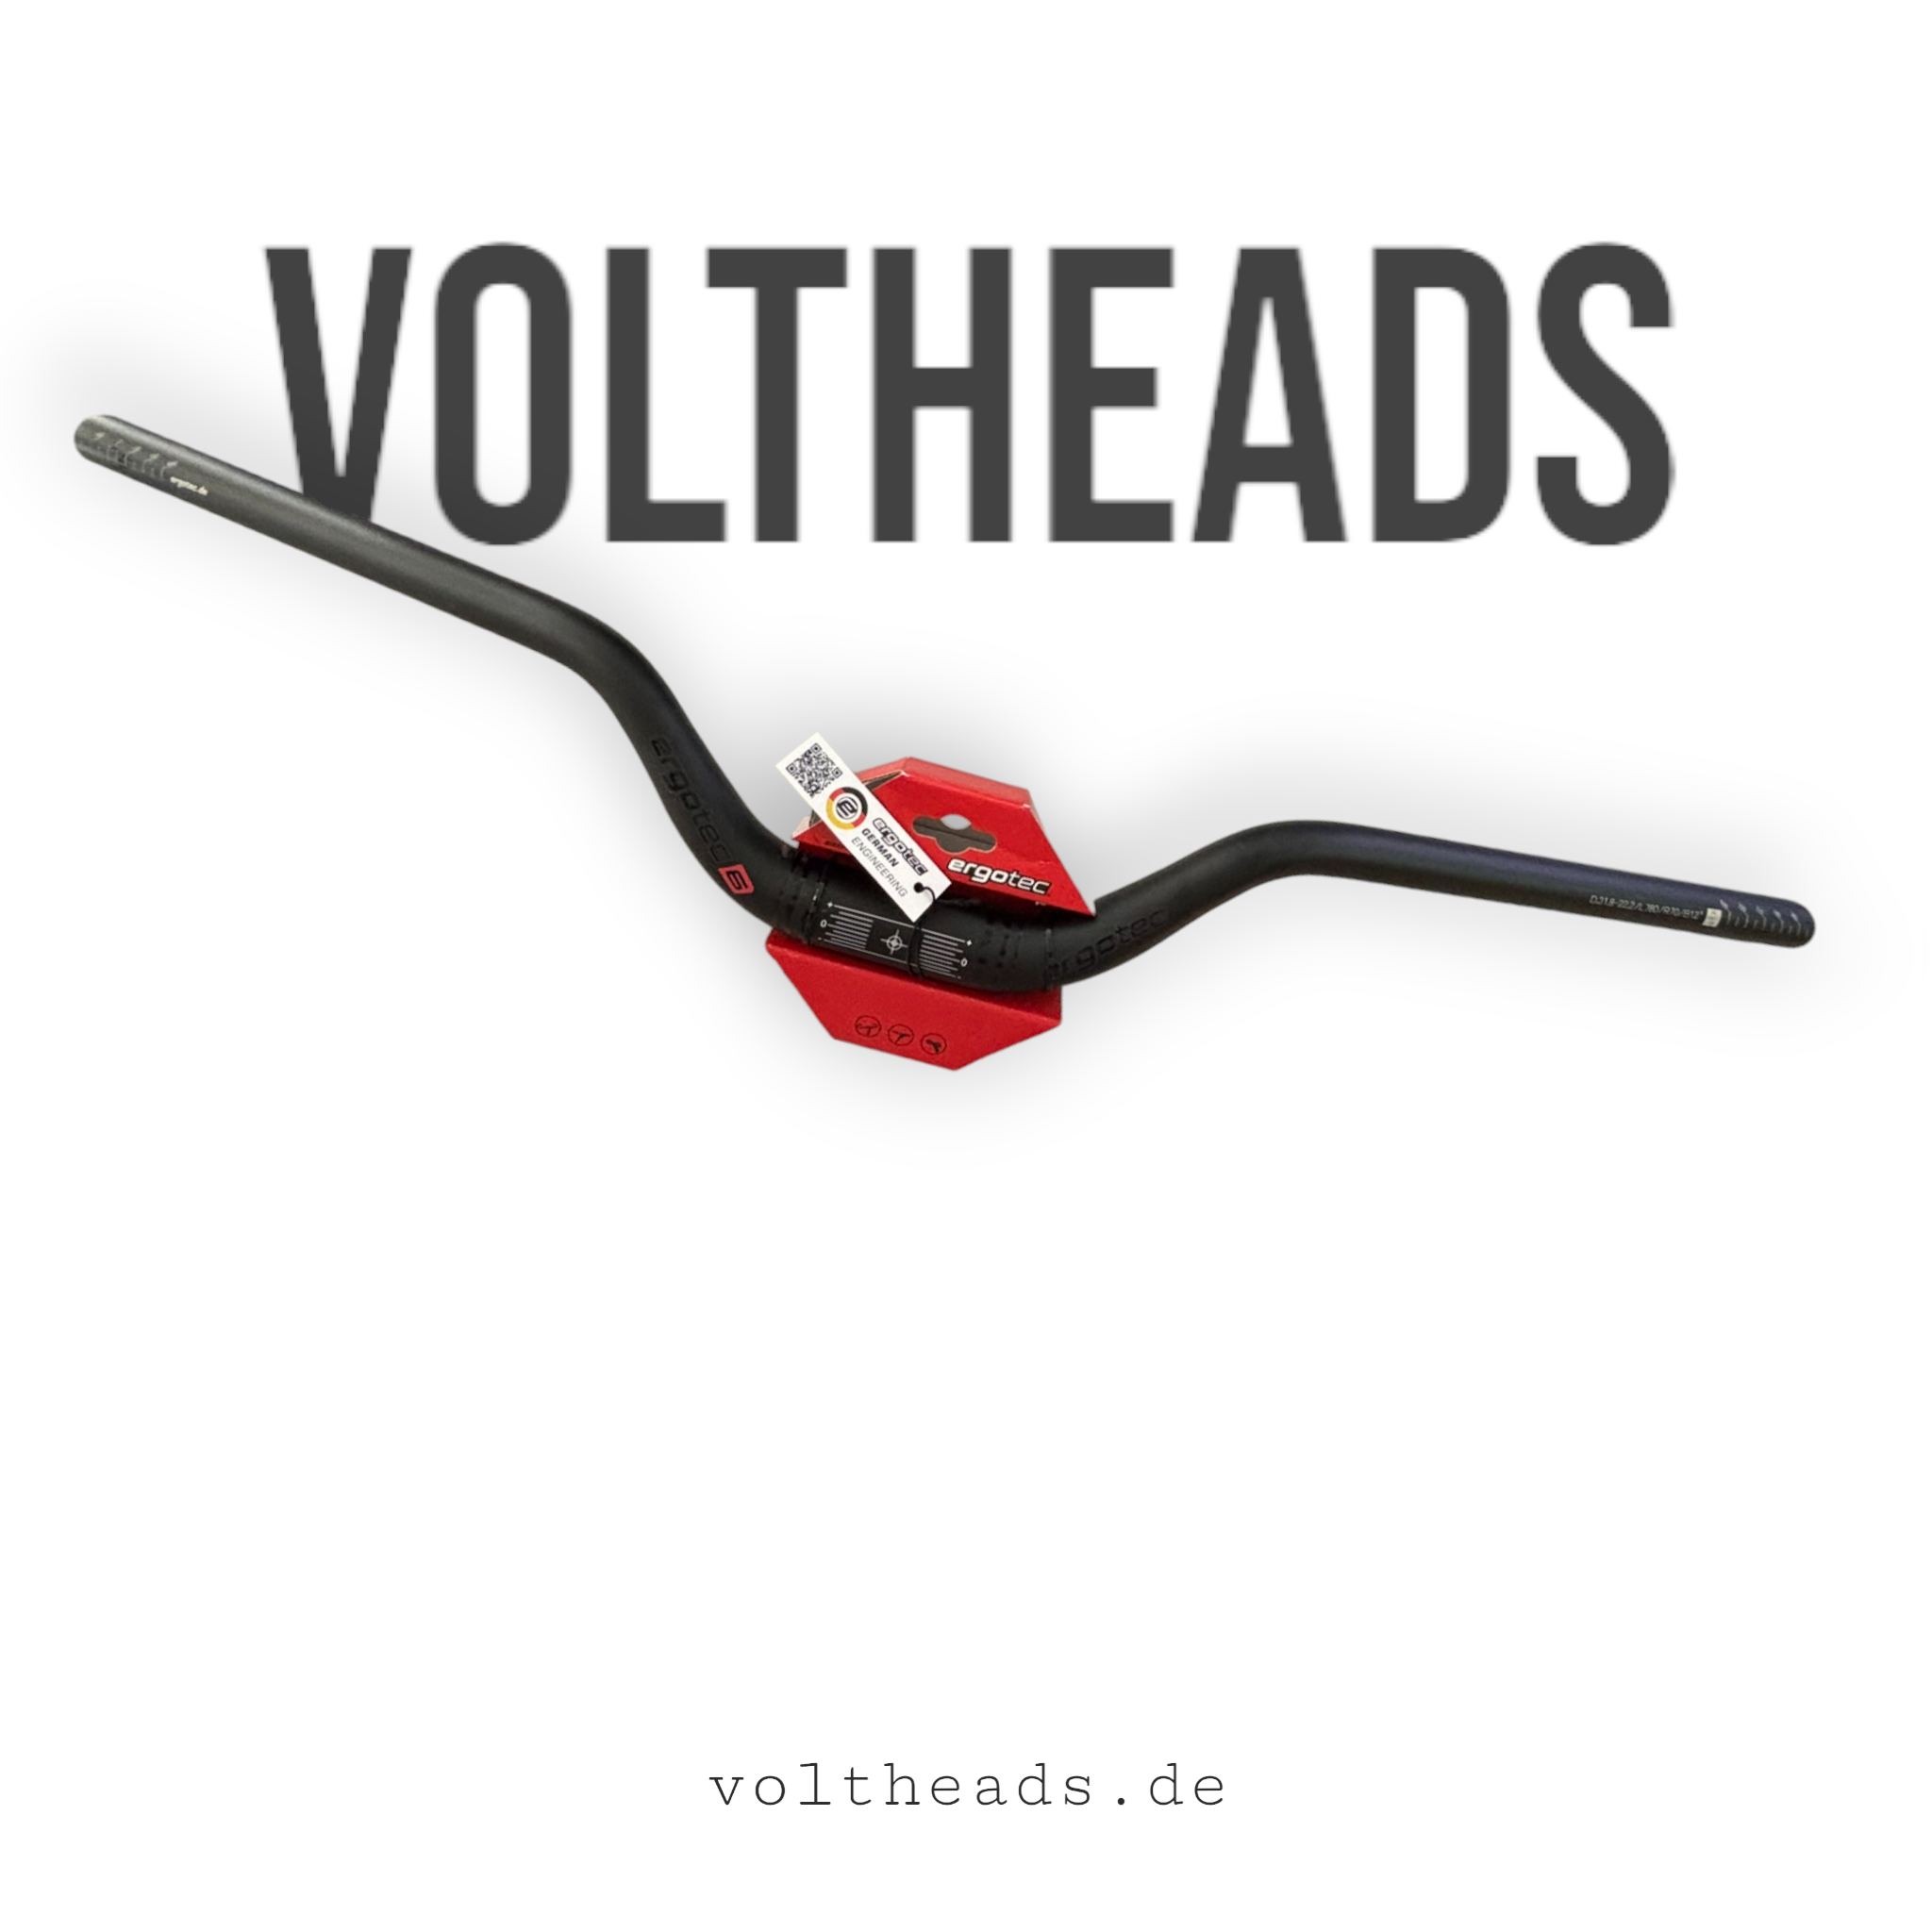 Voltheads